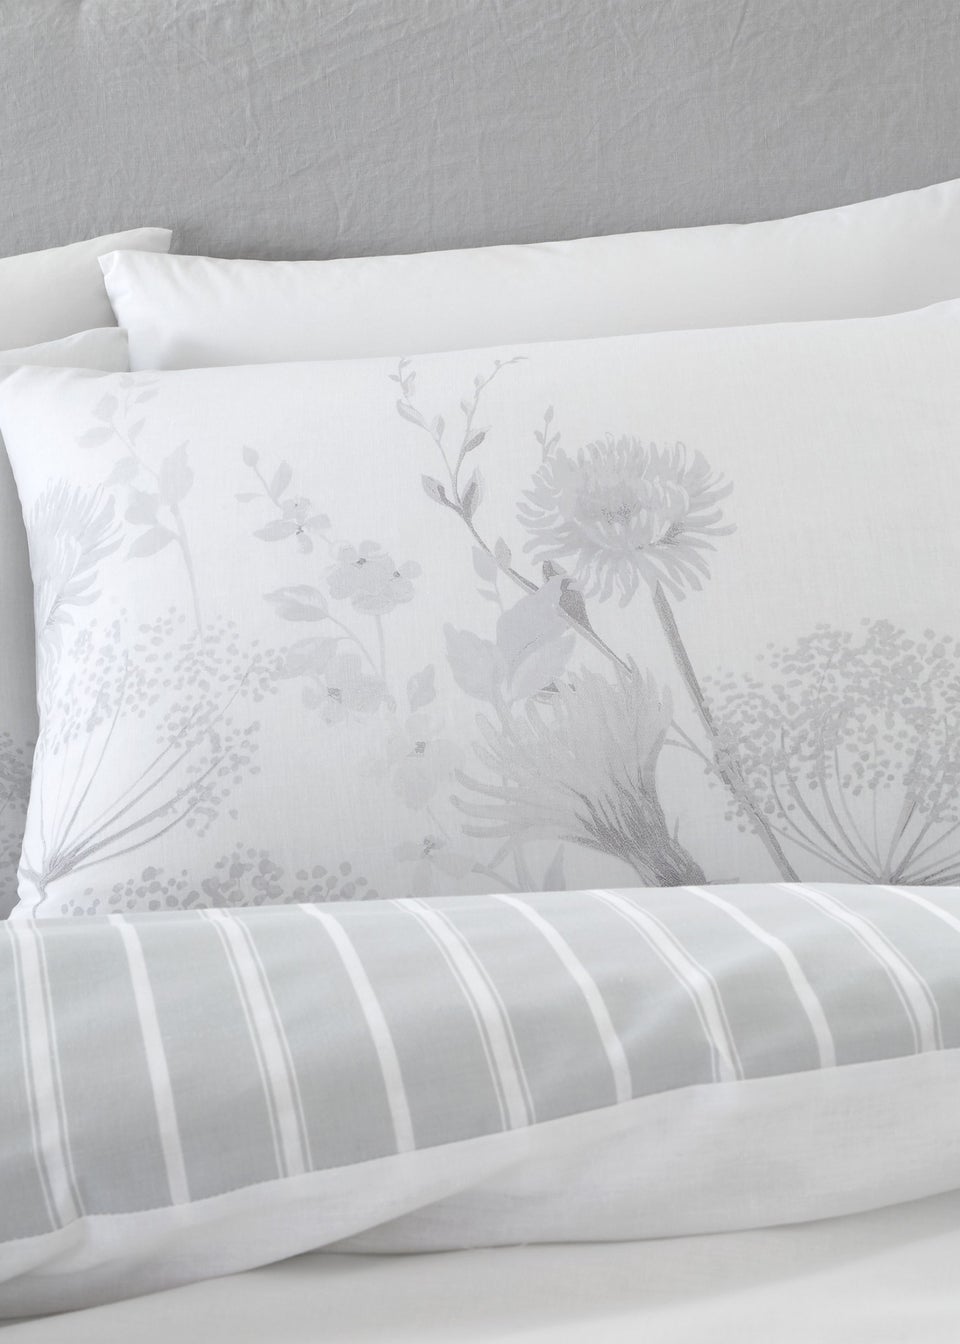 Catherine Lansfield Meadowsweet Floral Reversible Duvet Cover Set